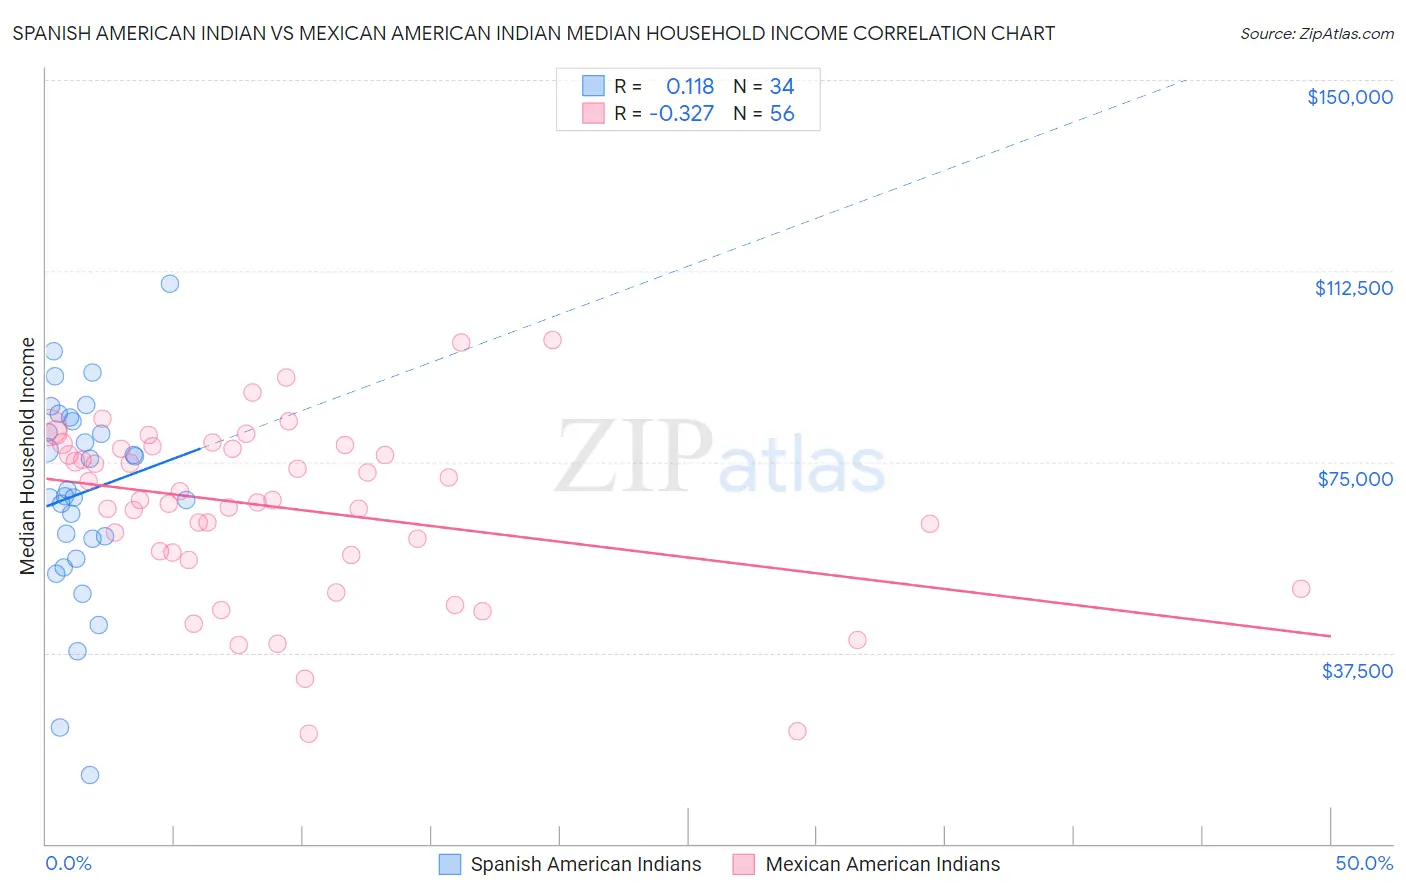 Spanish American Indian vs Mexican American Indian Median Household Income